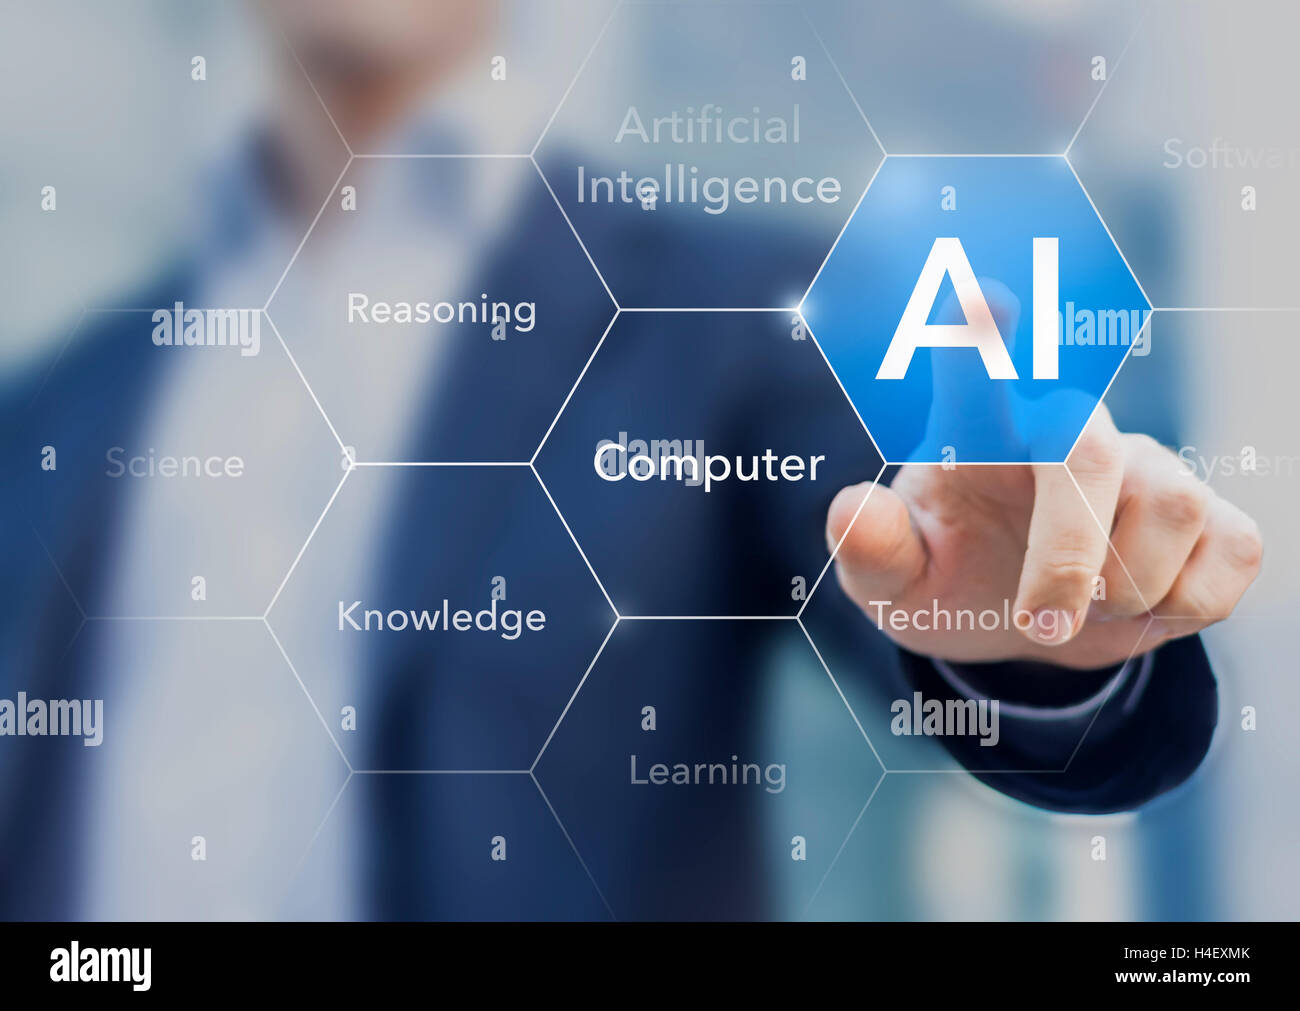 Artificial intelligence making possible new computer technologies and businesses Stock Photo